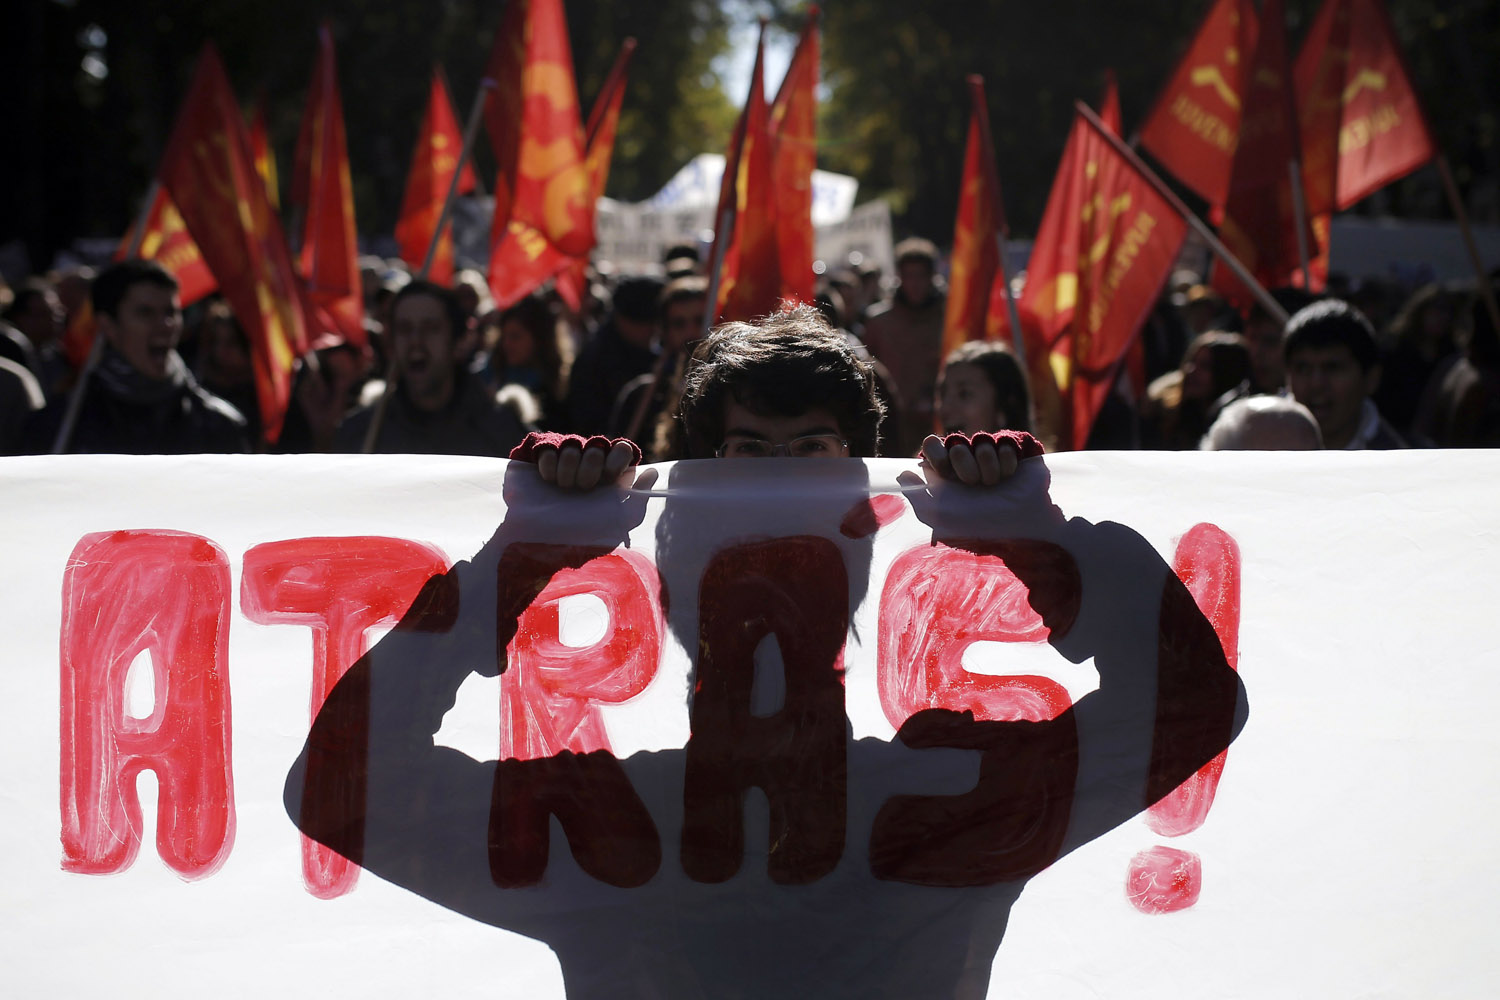 Nov. 23, 2013. Protesters march during a protest against government's austerity measures,  in Madrid, Spain.